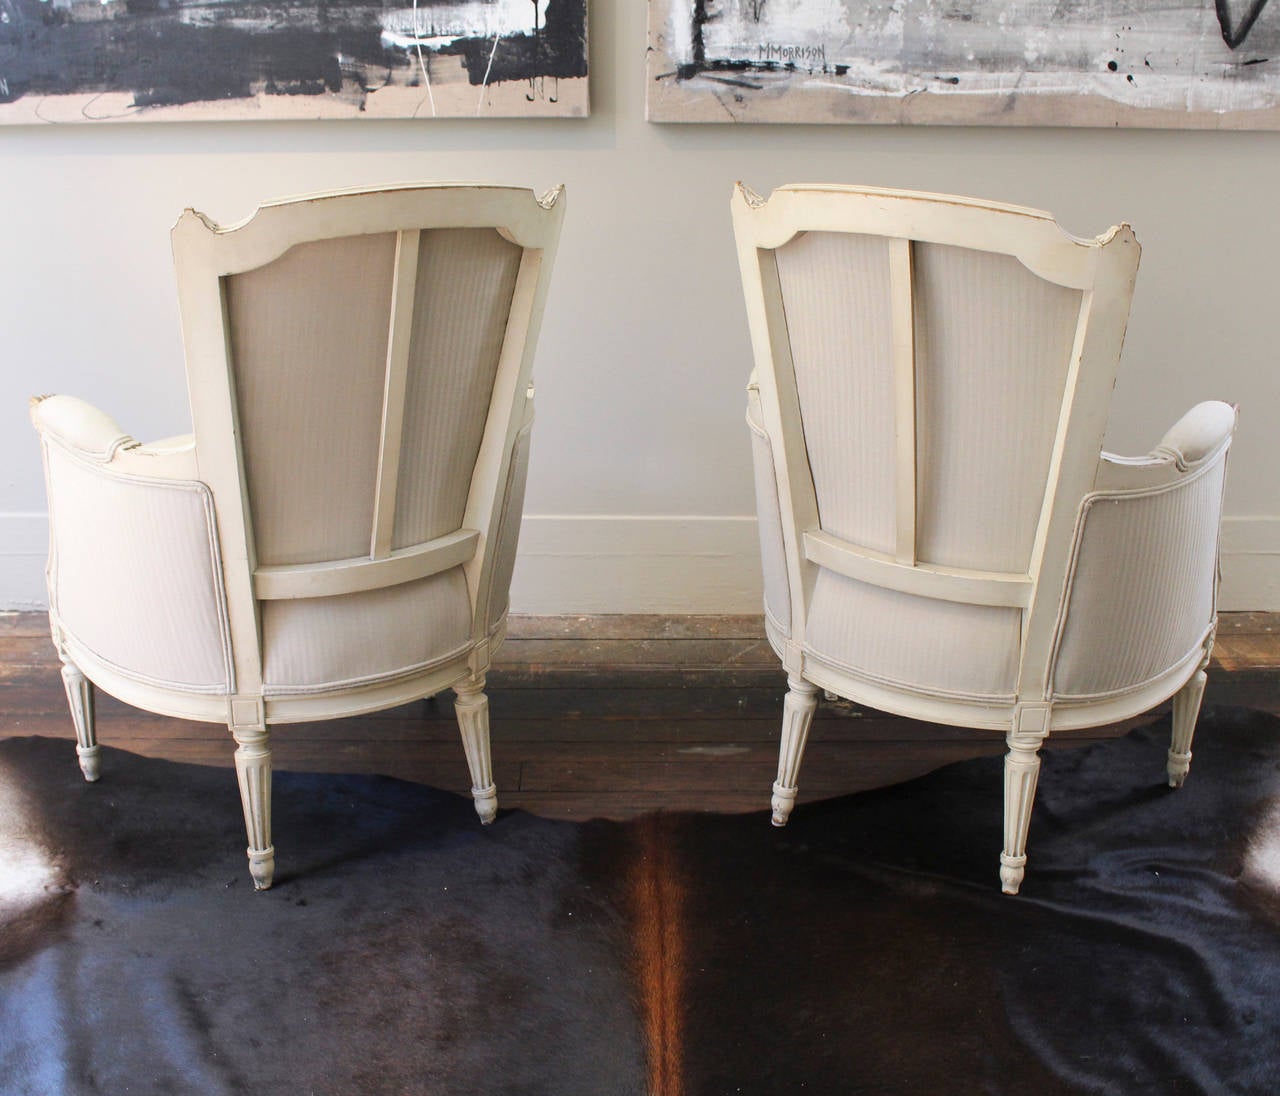 Pair of bergeres, 19th century France, in time worn oyster paint raised on rosette-topped tapering fluted legs. Newly upholstered in a natural shadow-striped Rogers & Goffigon fabric, the chairs feature padded elbow rests on scroll-curved arms.